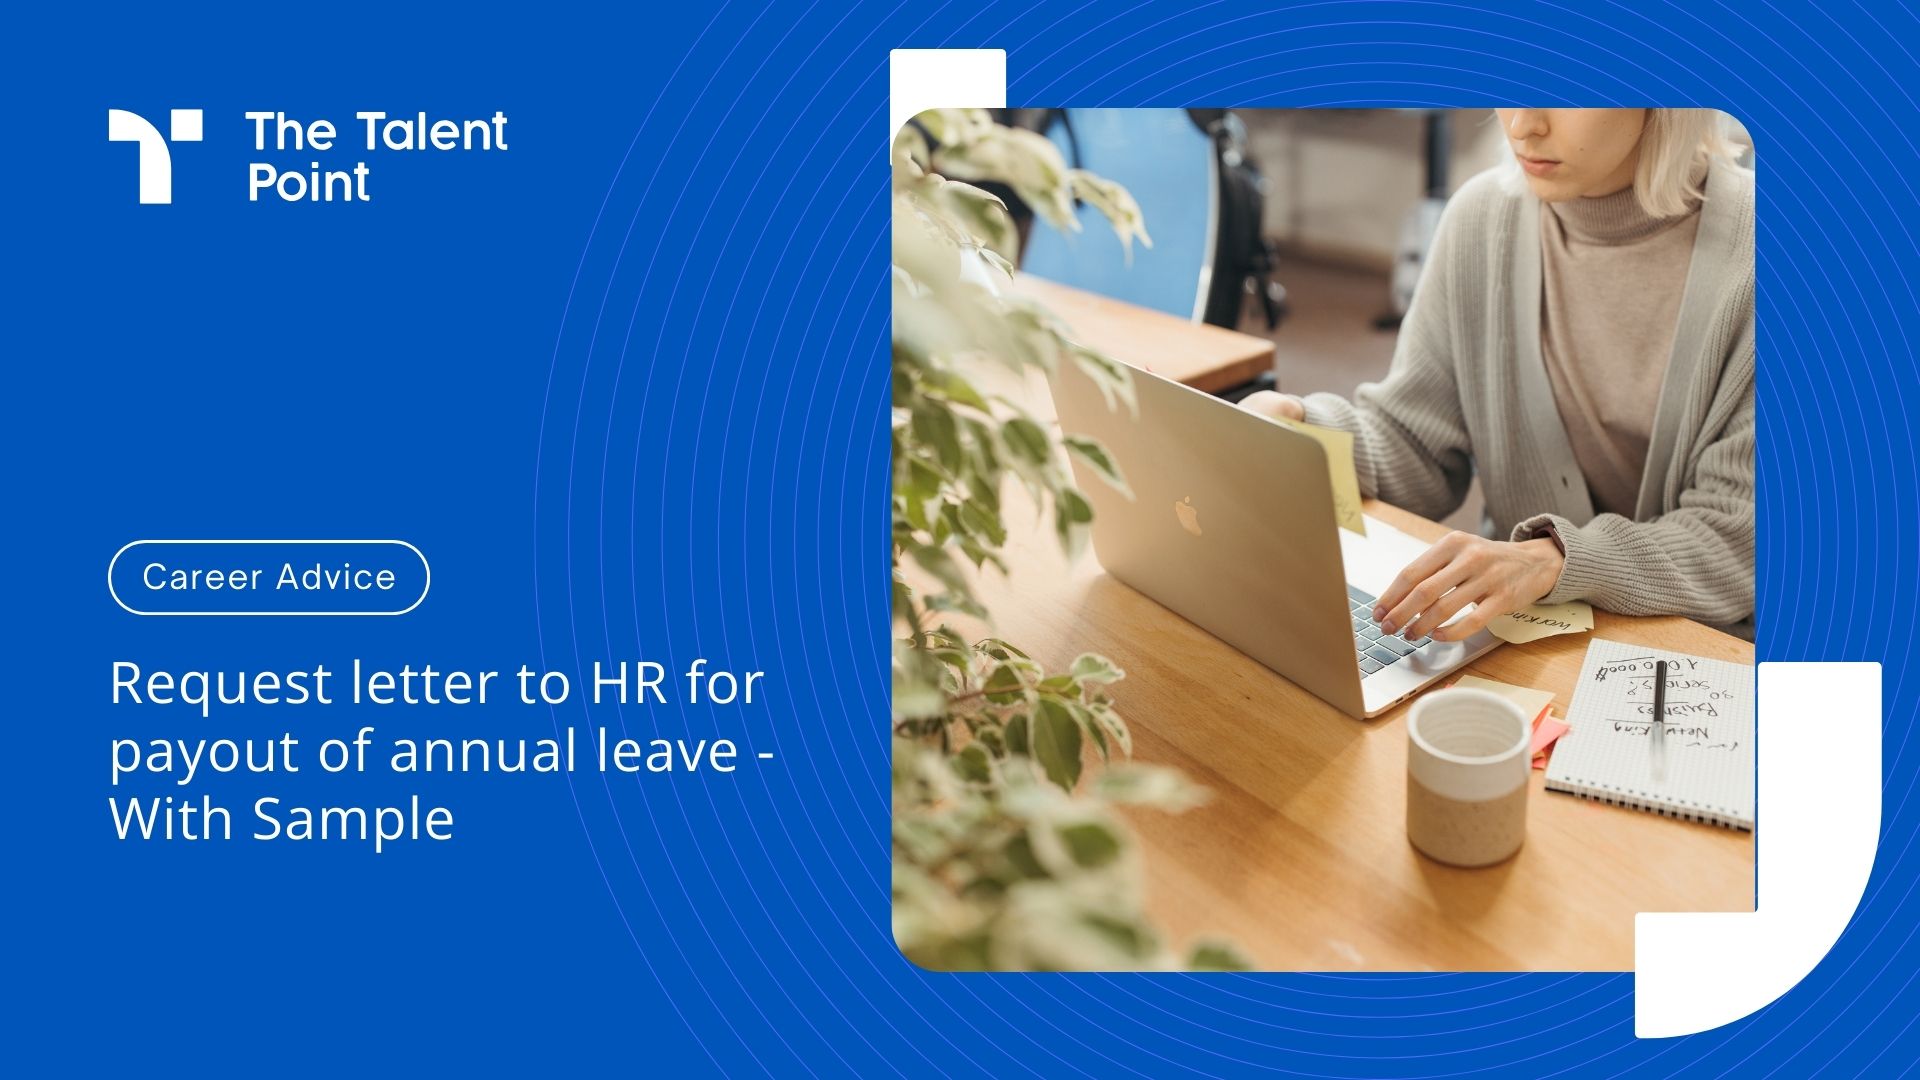 Request Letter to HR for Payout of Annual Leave - With Sample - TalentPoint